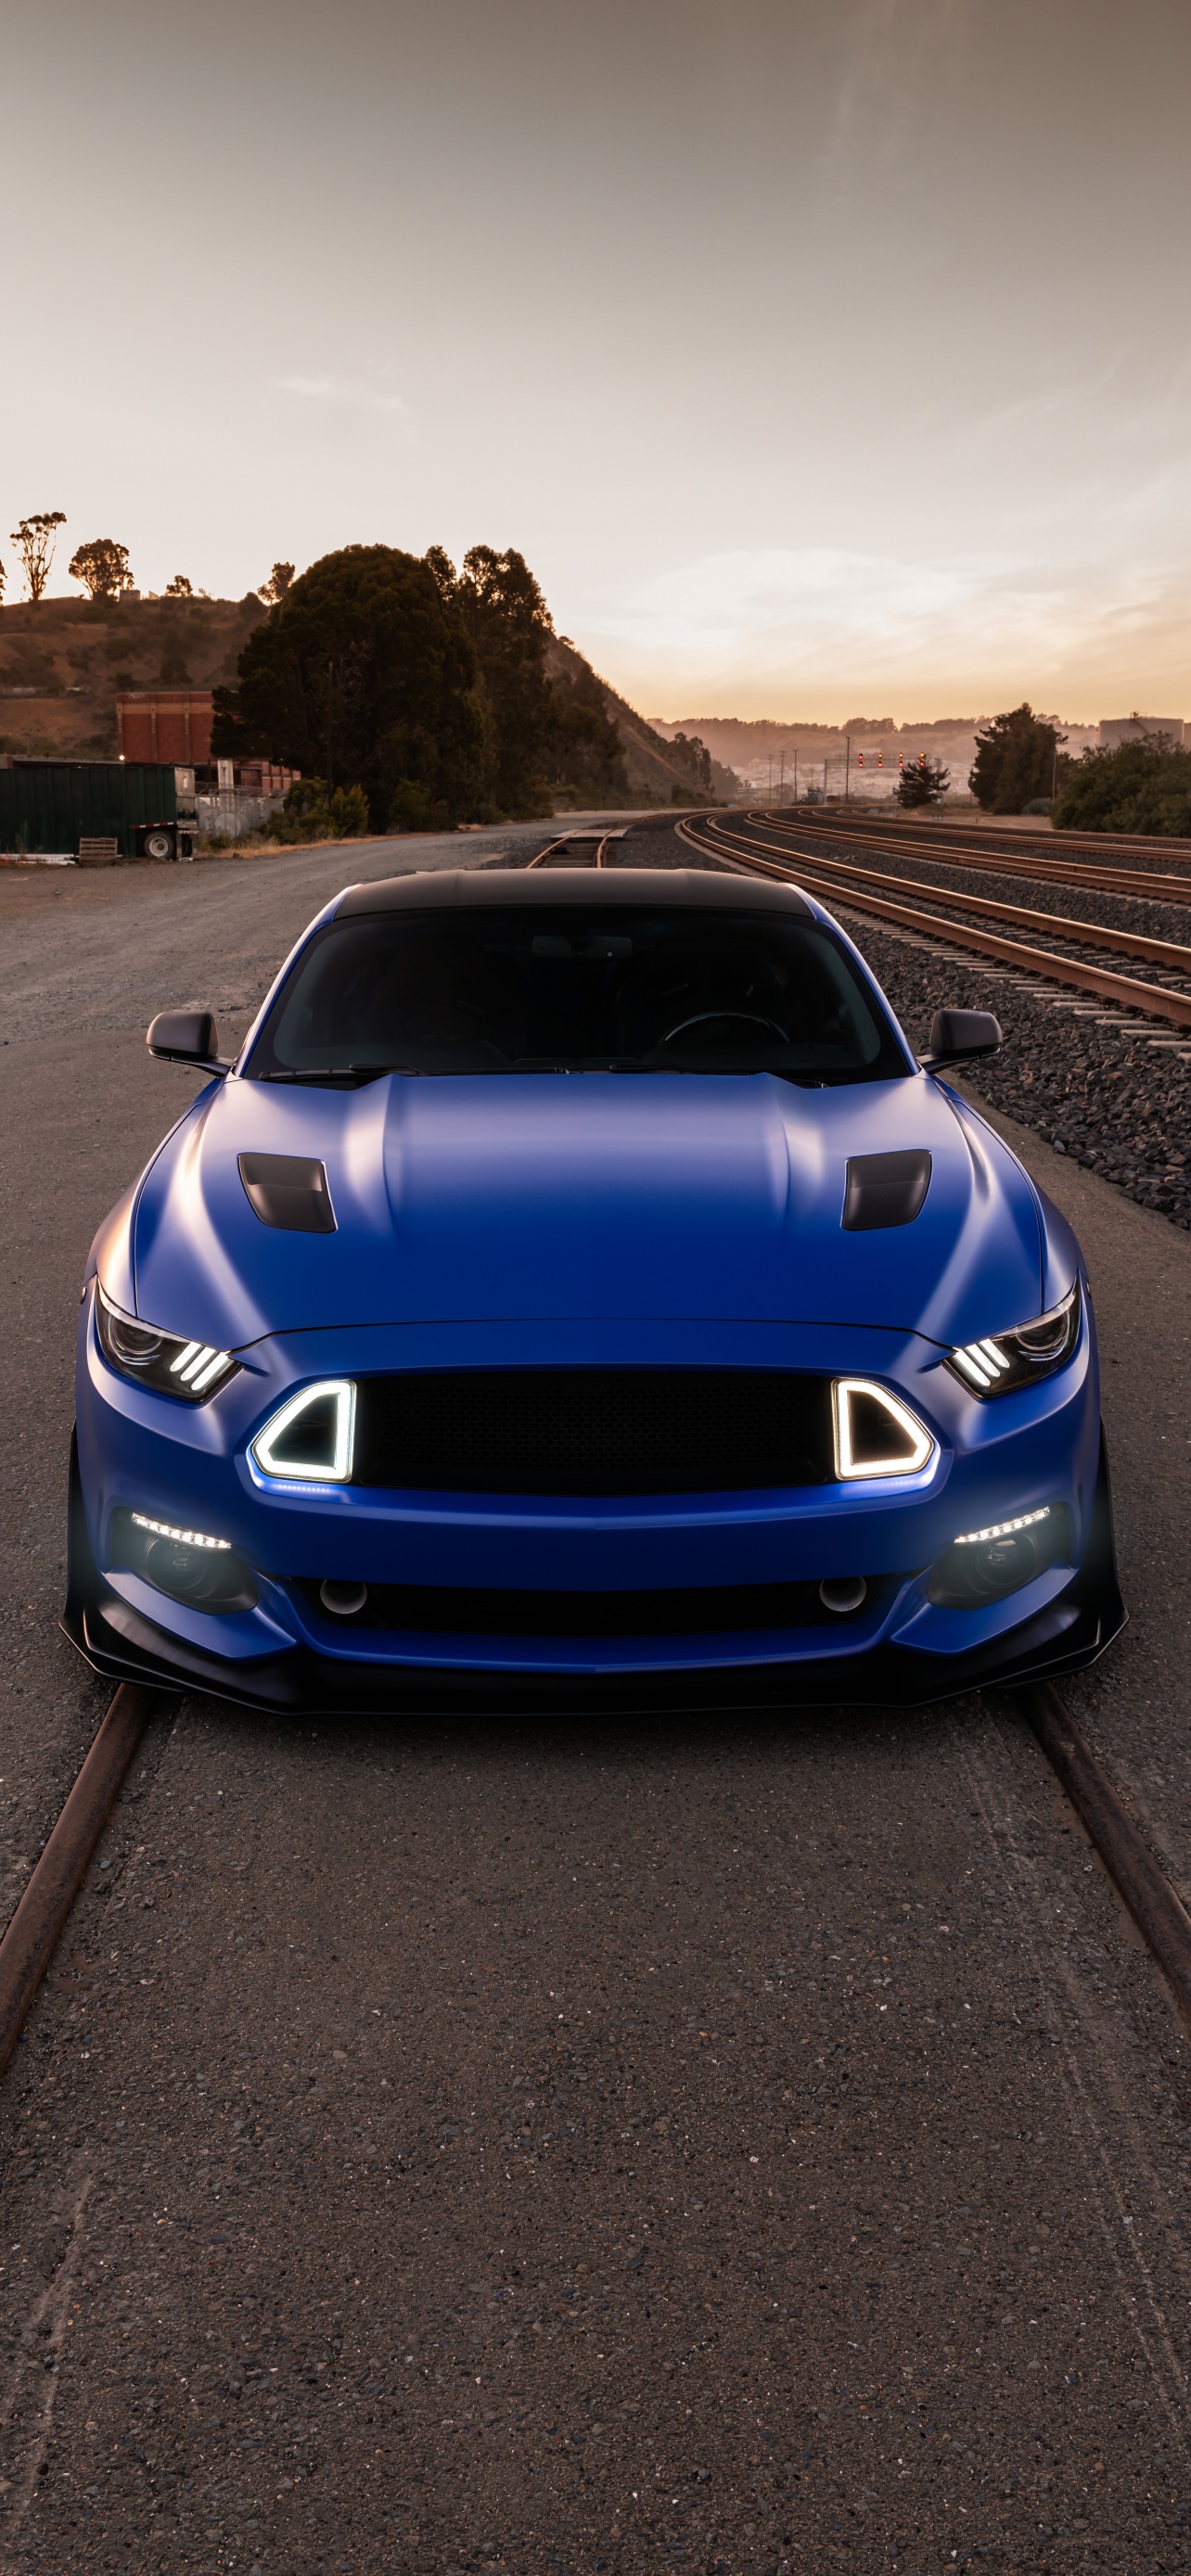 Details More Than Cool Mustang Wallpapers Super Hot In Cdgdbentre